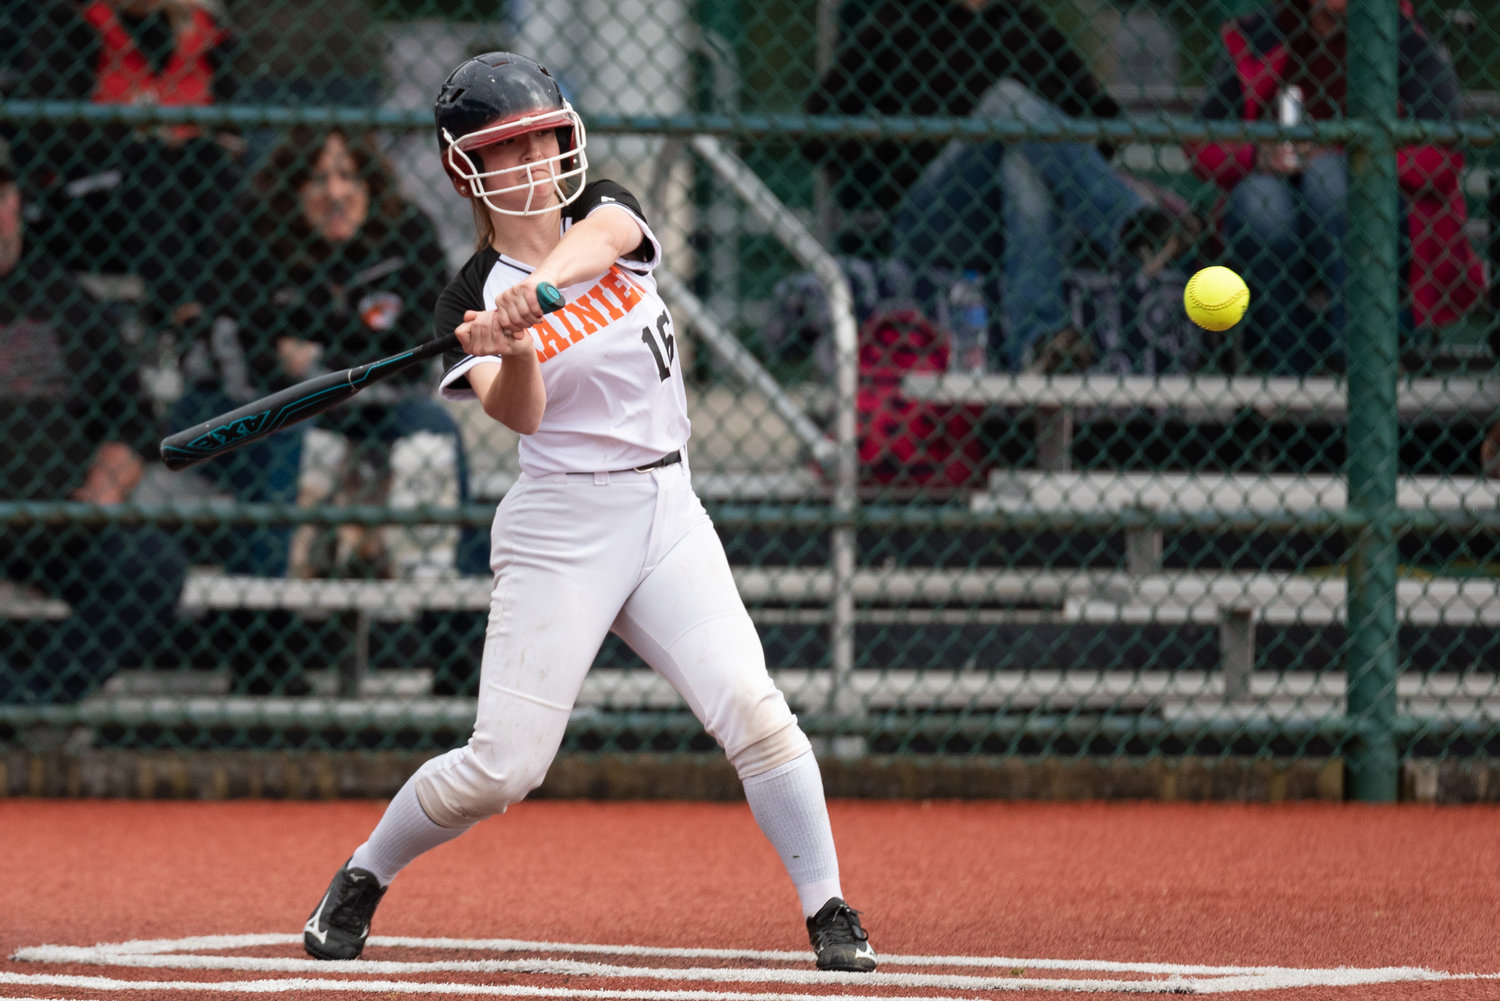 Rainier's Carolyn Ferguson swings at a pitch against Napavine at the Lacey Regional Athletic Complex May 6.